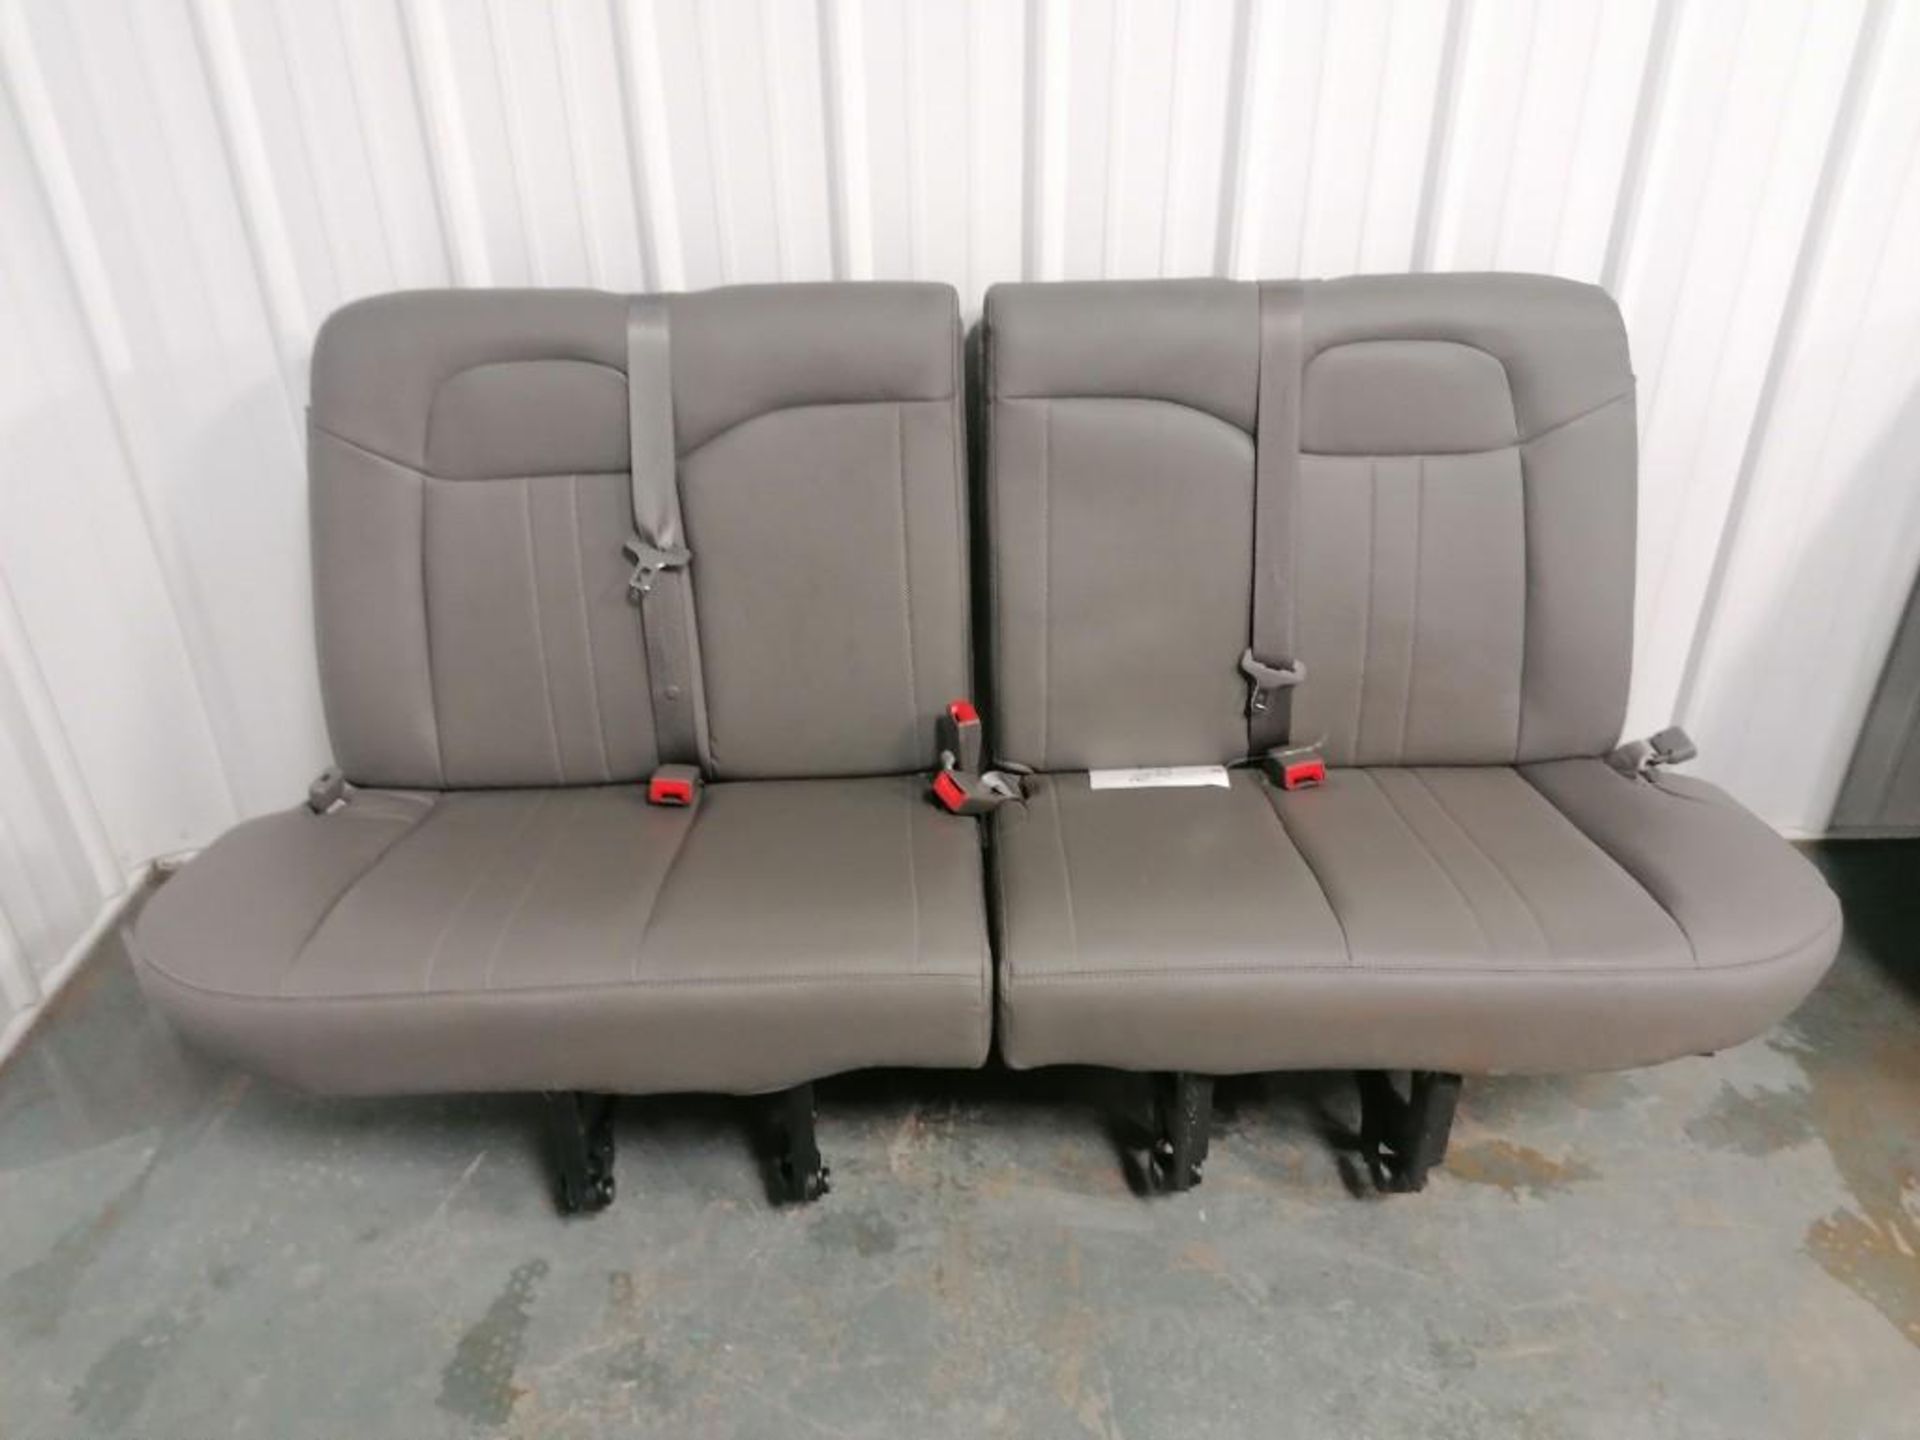 2021 NEW Chevrolet Express Passenger Seat Row. Located in Mt. Pleasant, IA.